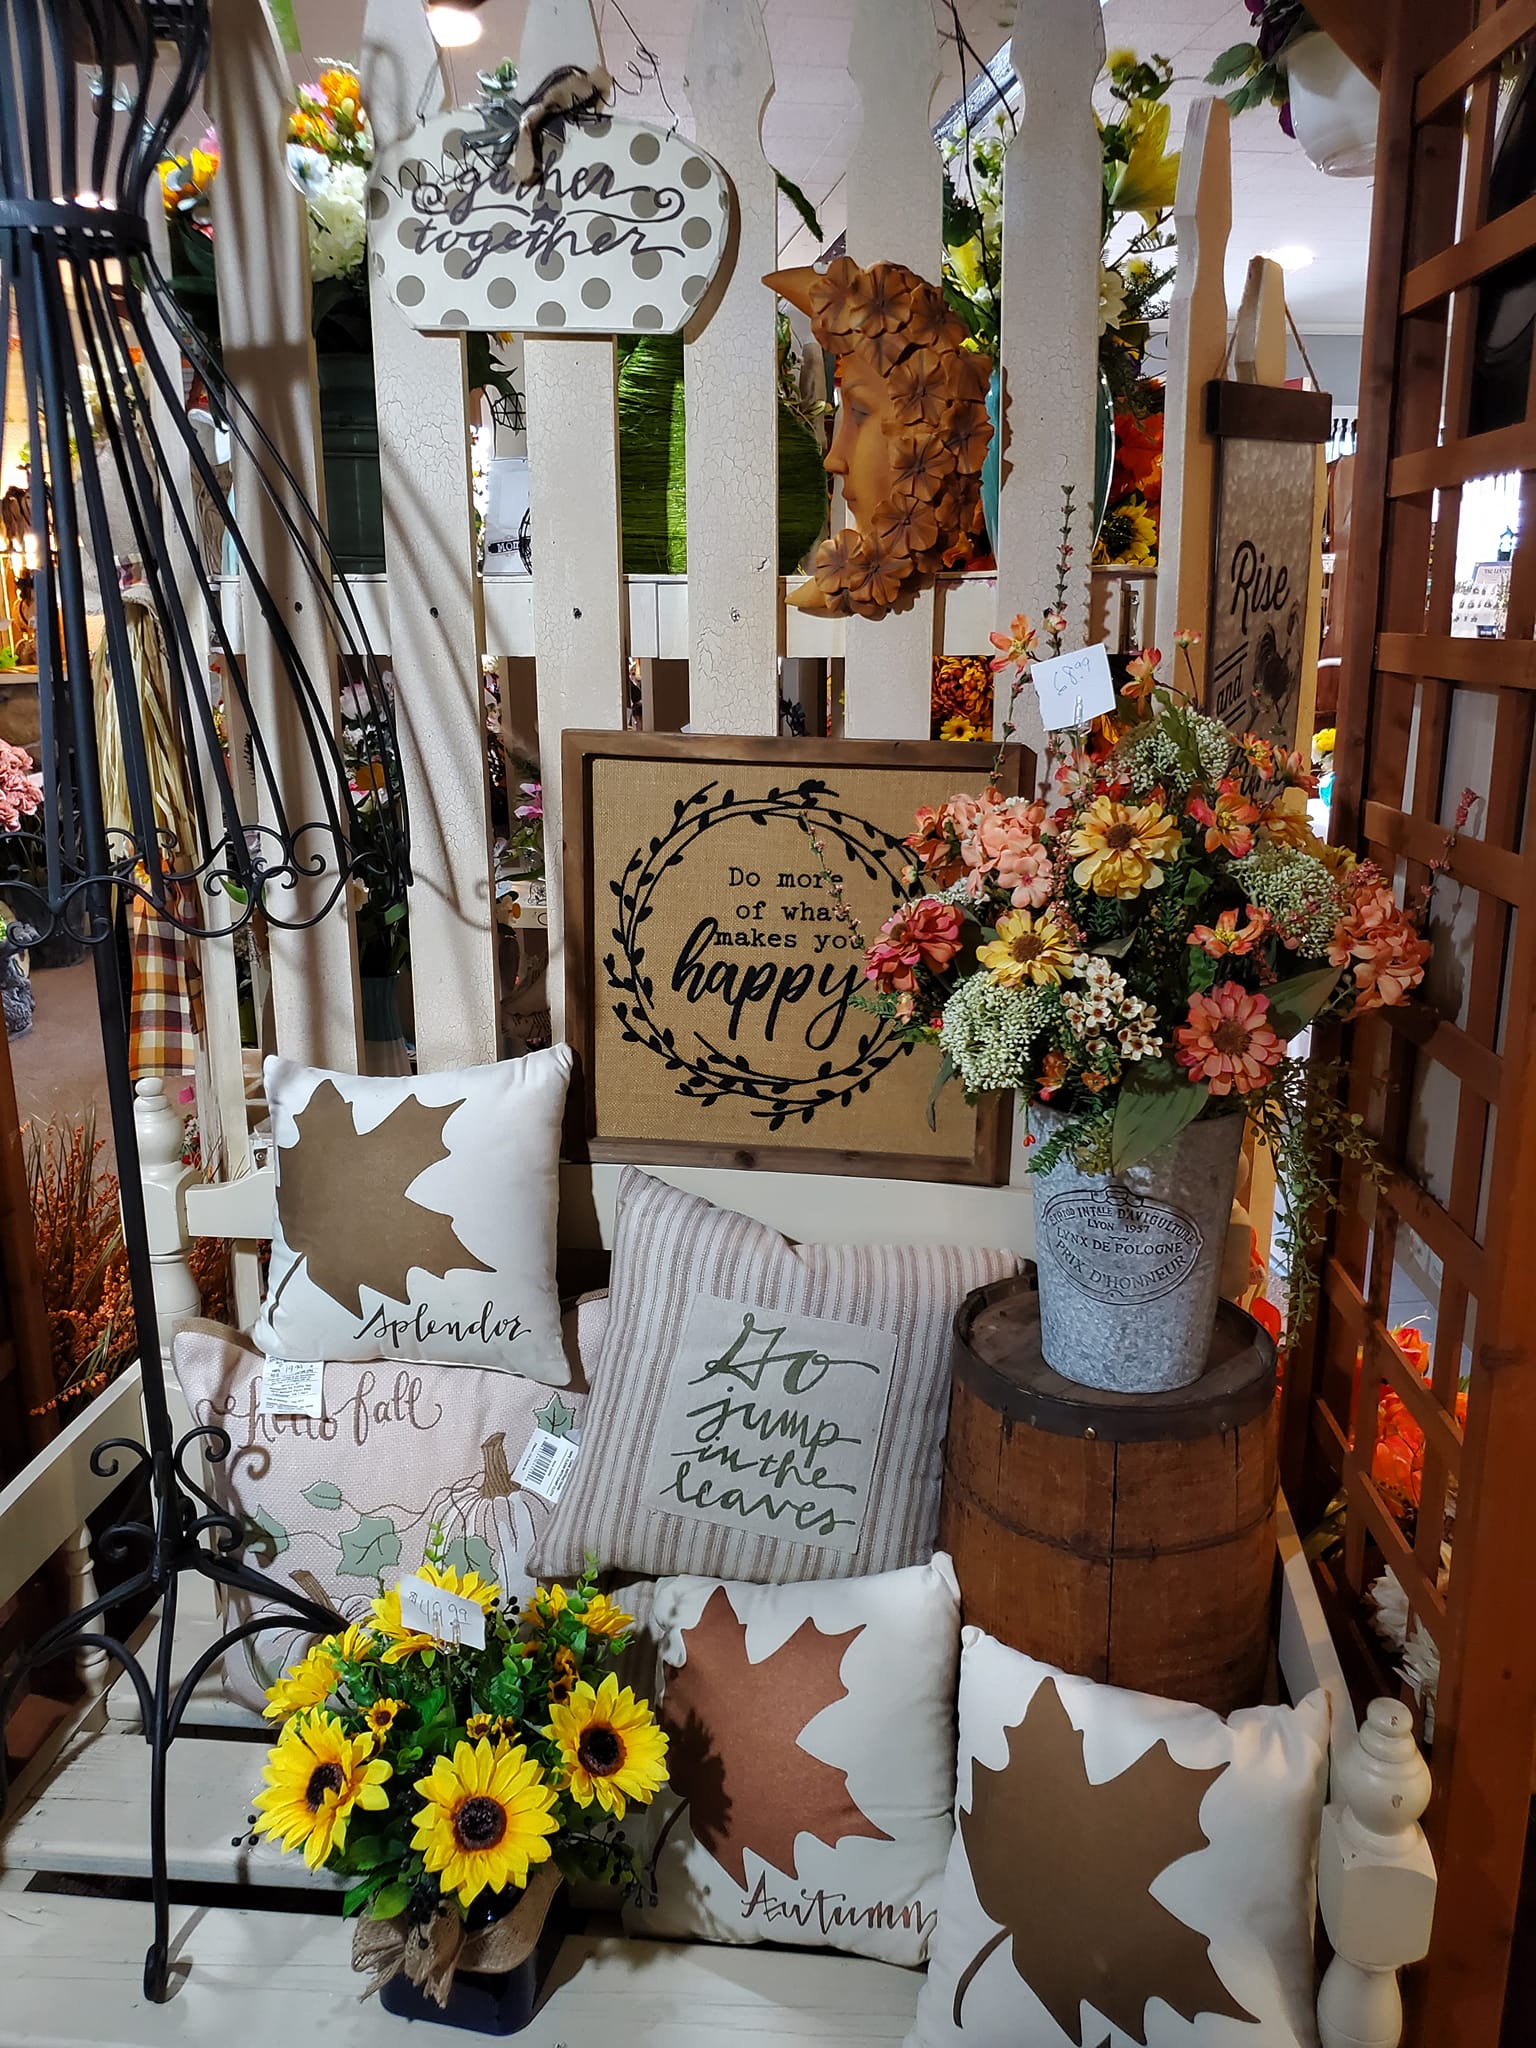 De'Vine Floral Designs and Gifts 110 N Columbia Ave, Oglesby Illinois 61348